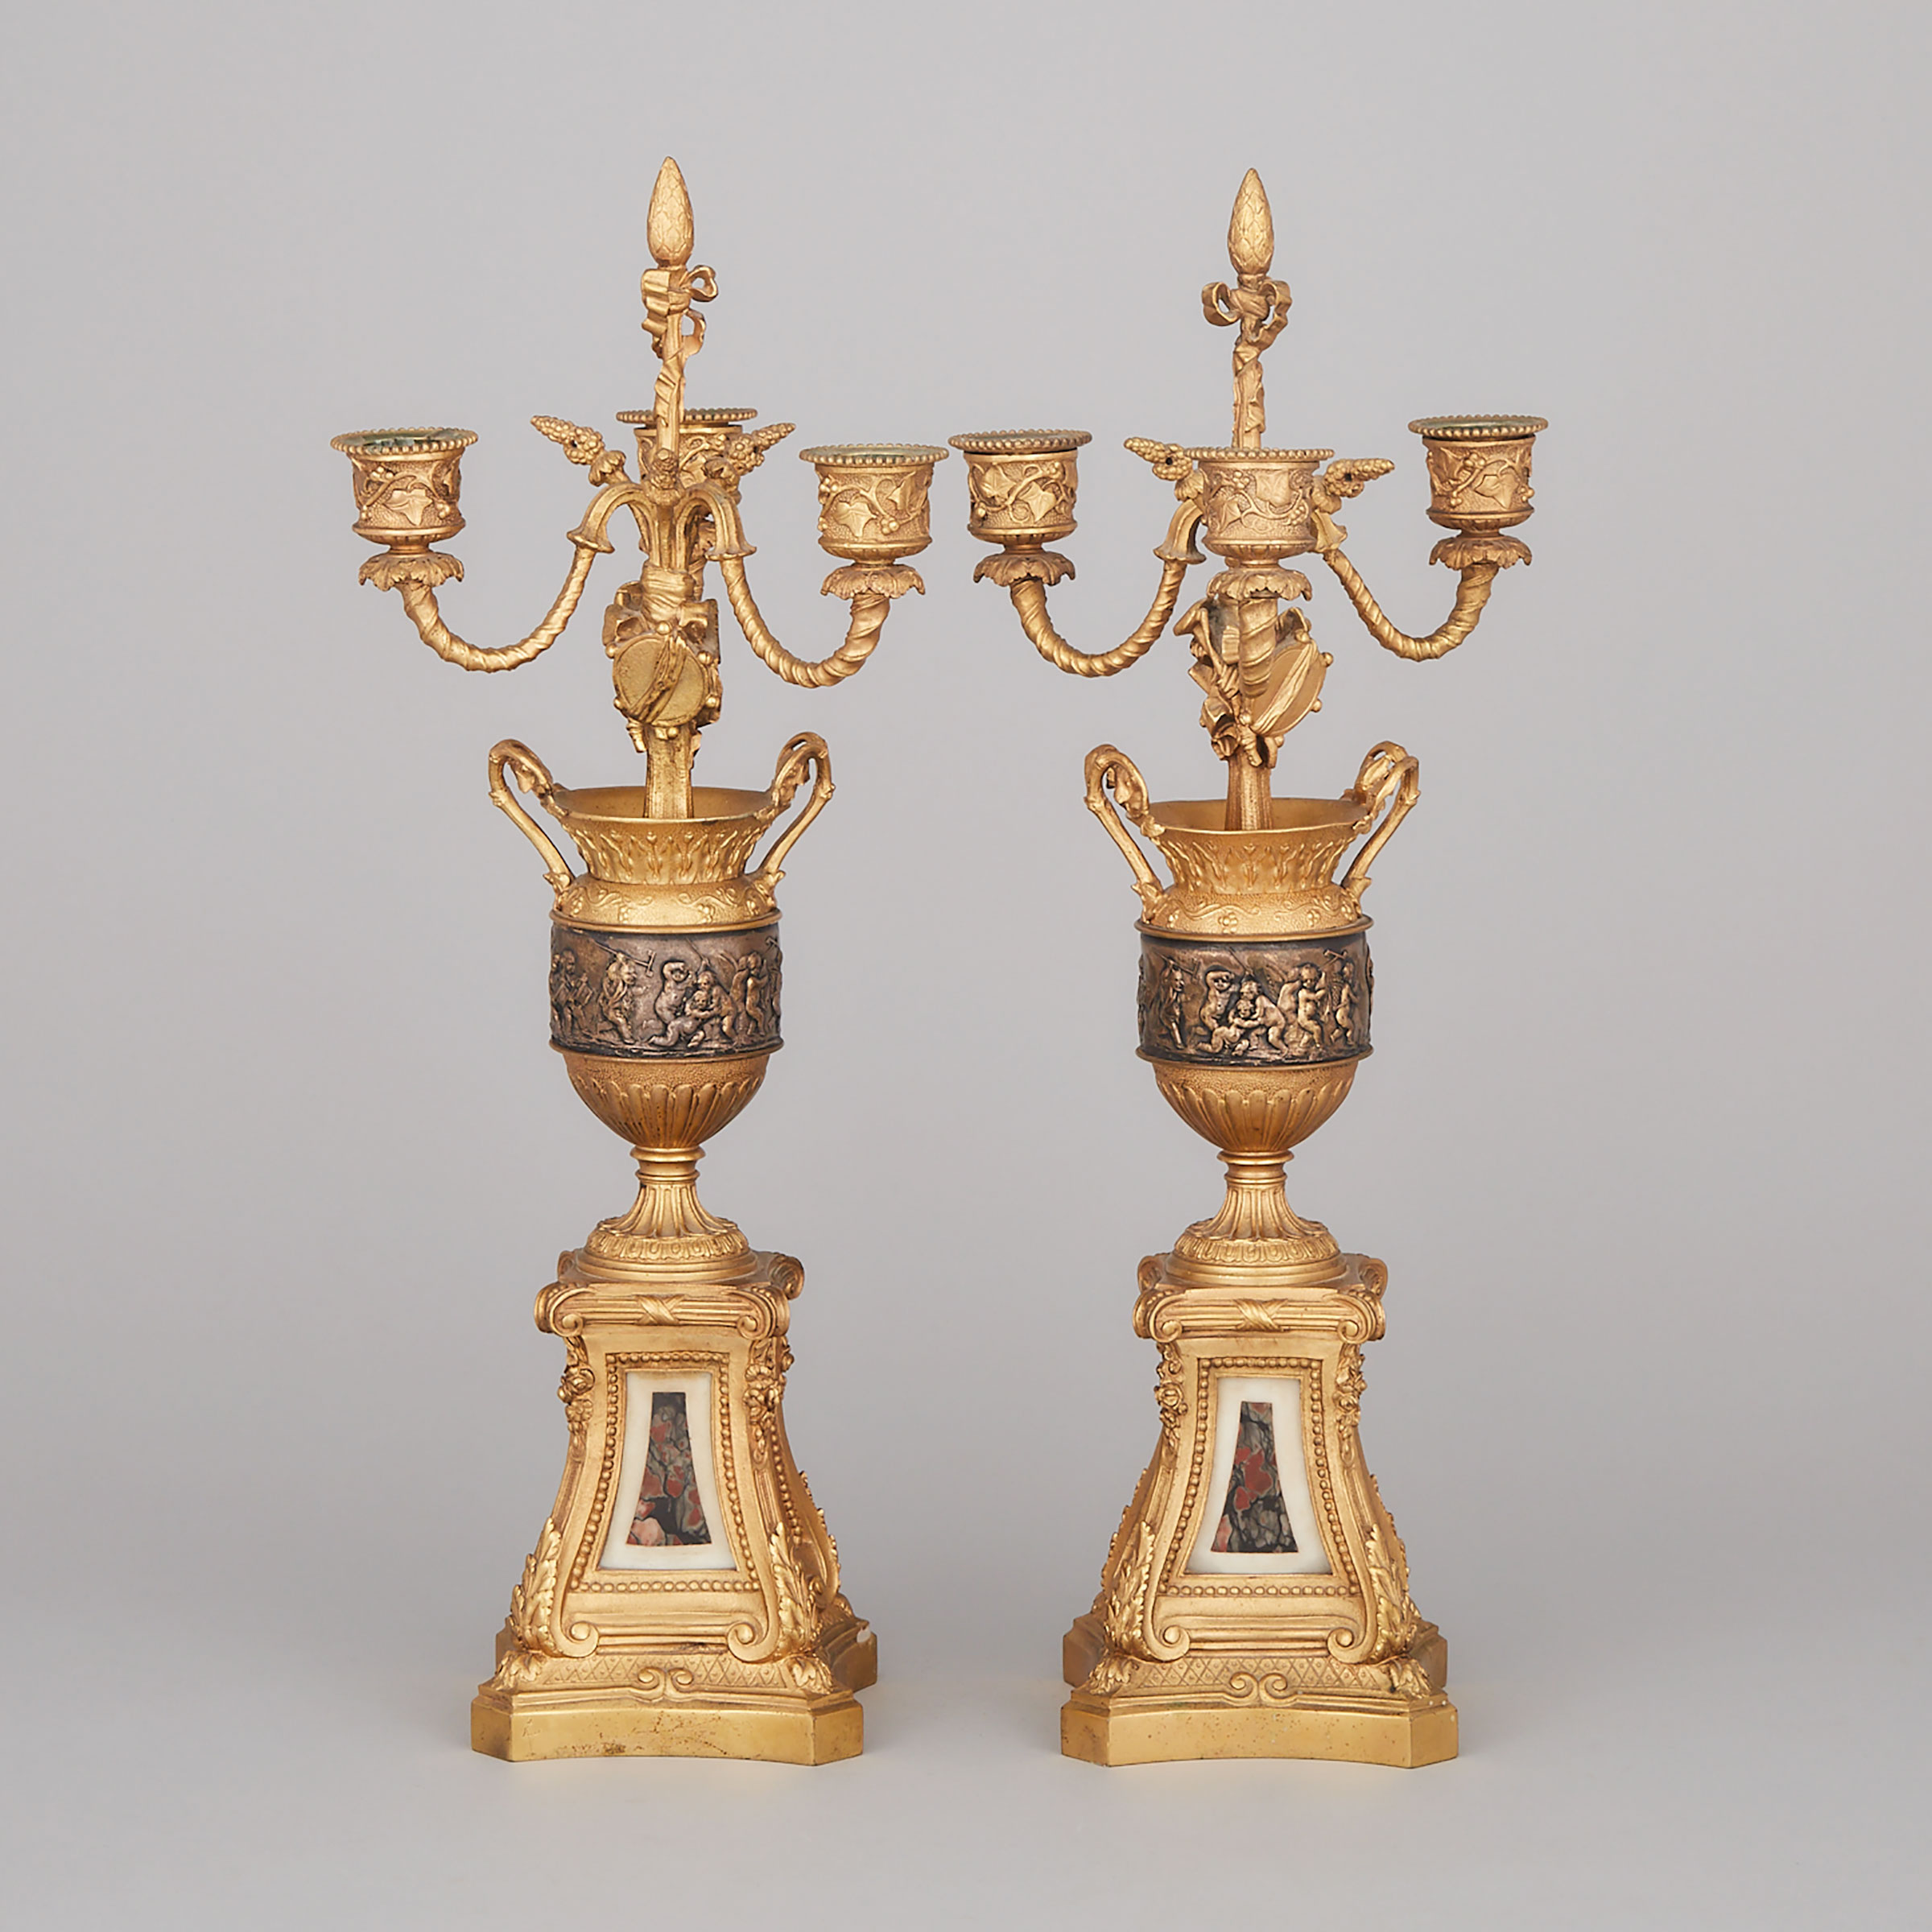 Pair of Neoclassical Gilt and Patinated Bronze Candelabra, 19th century